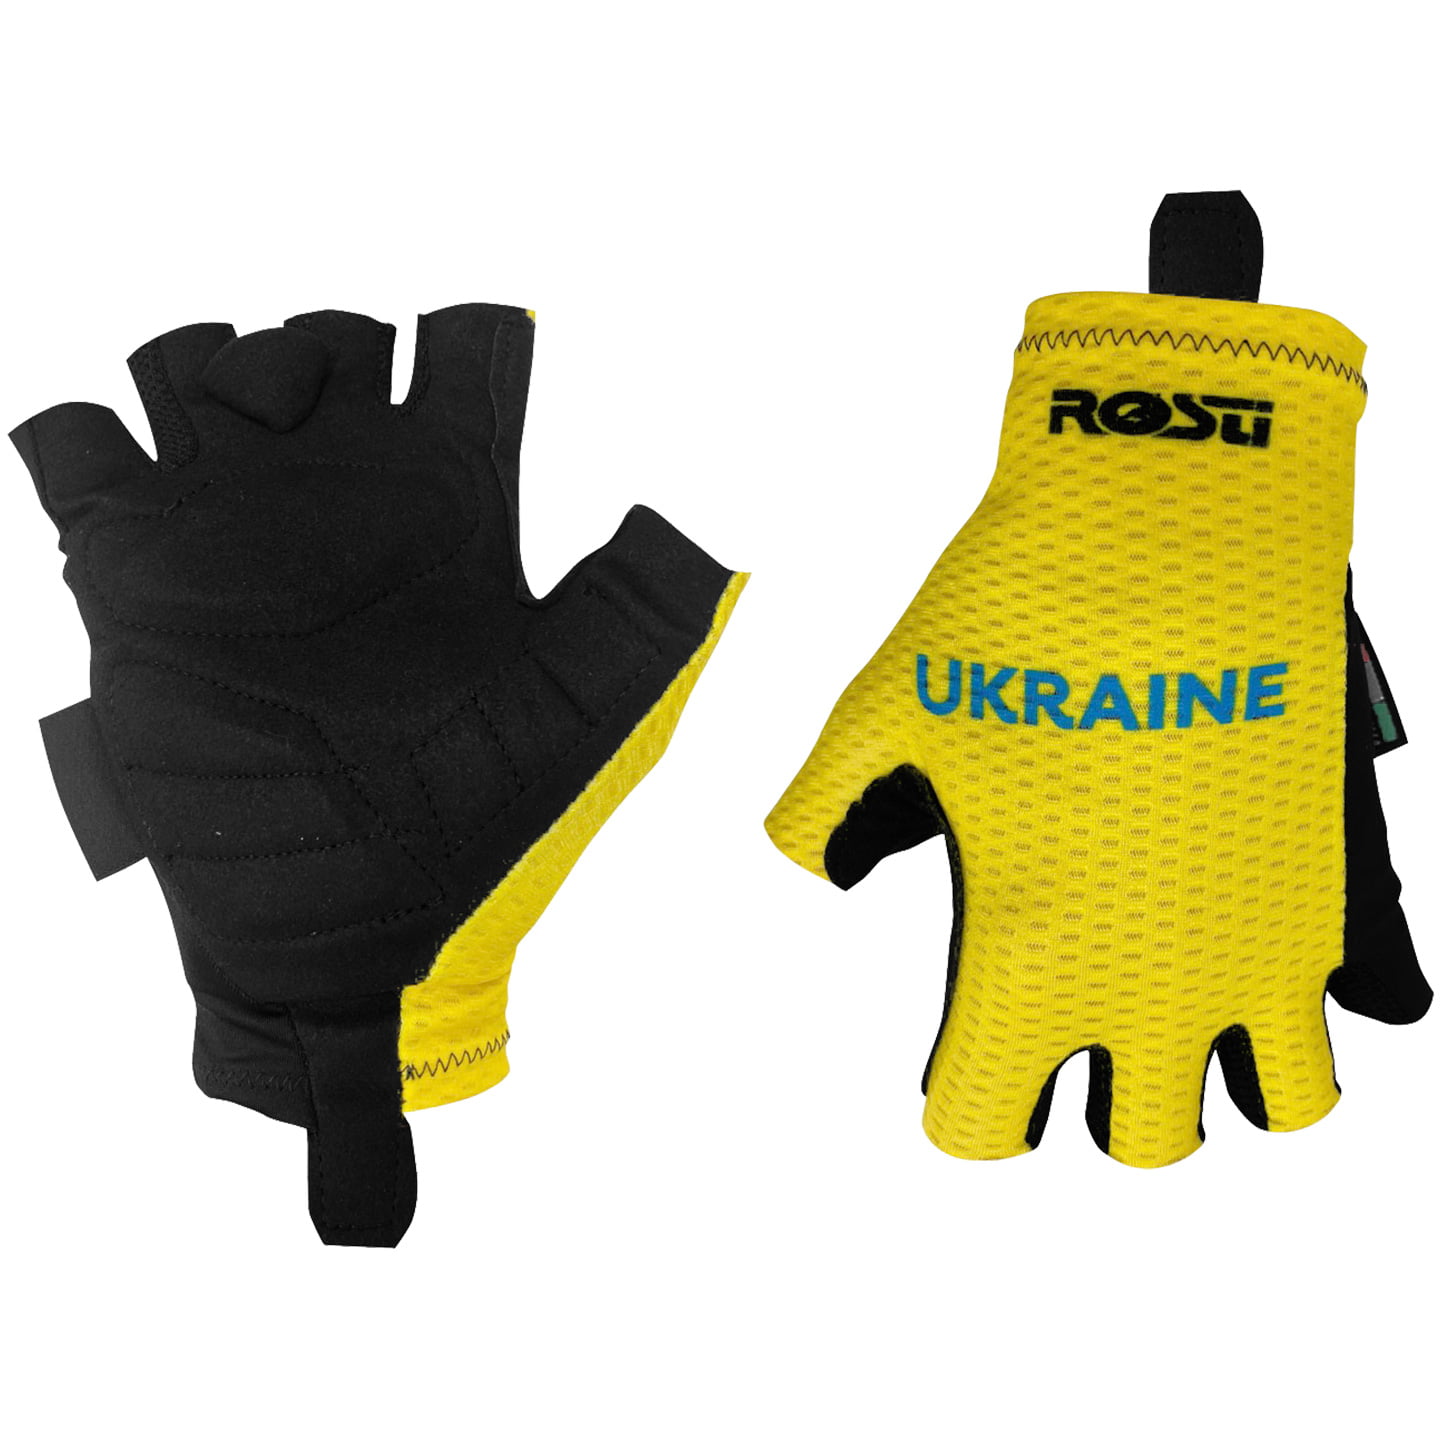 UKRAINIAN NATIONAL TEAM 2022 Cycling Gloves, for men, size L, Cycling gloves, Bike gear